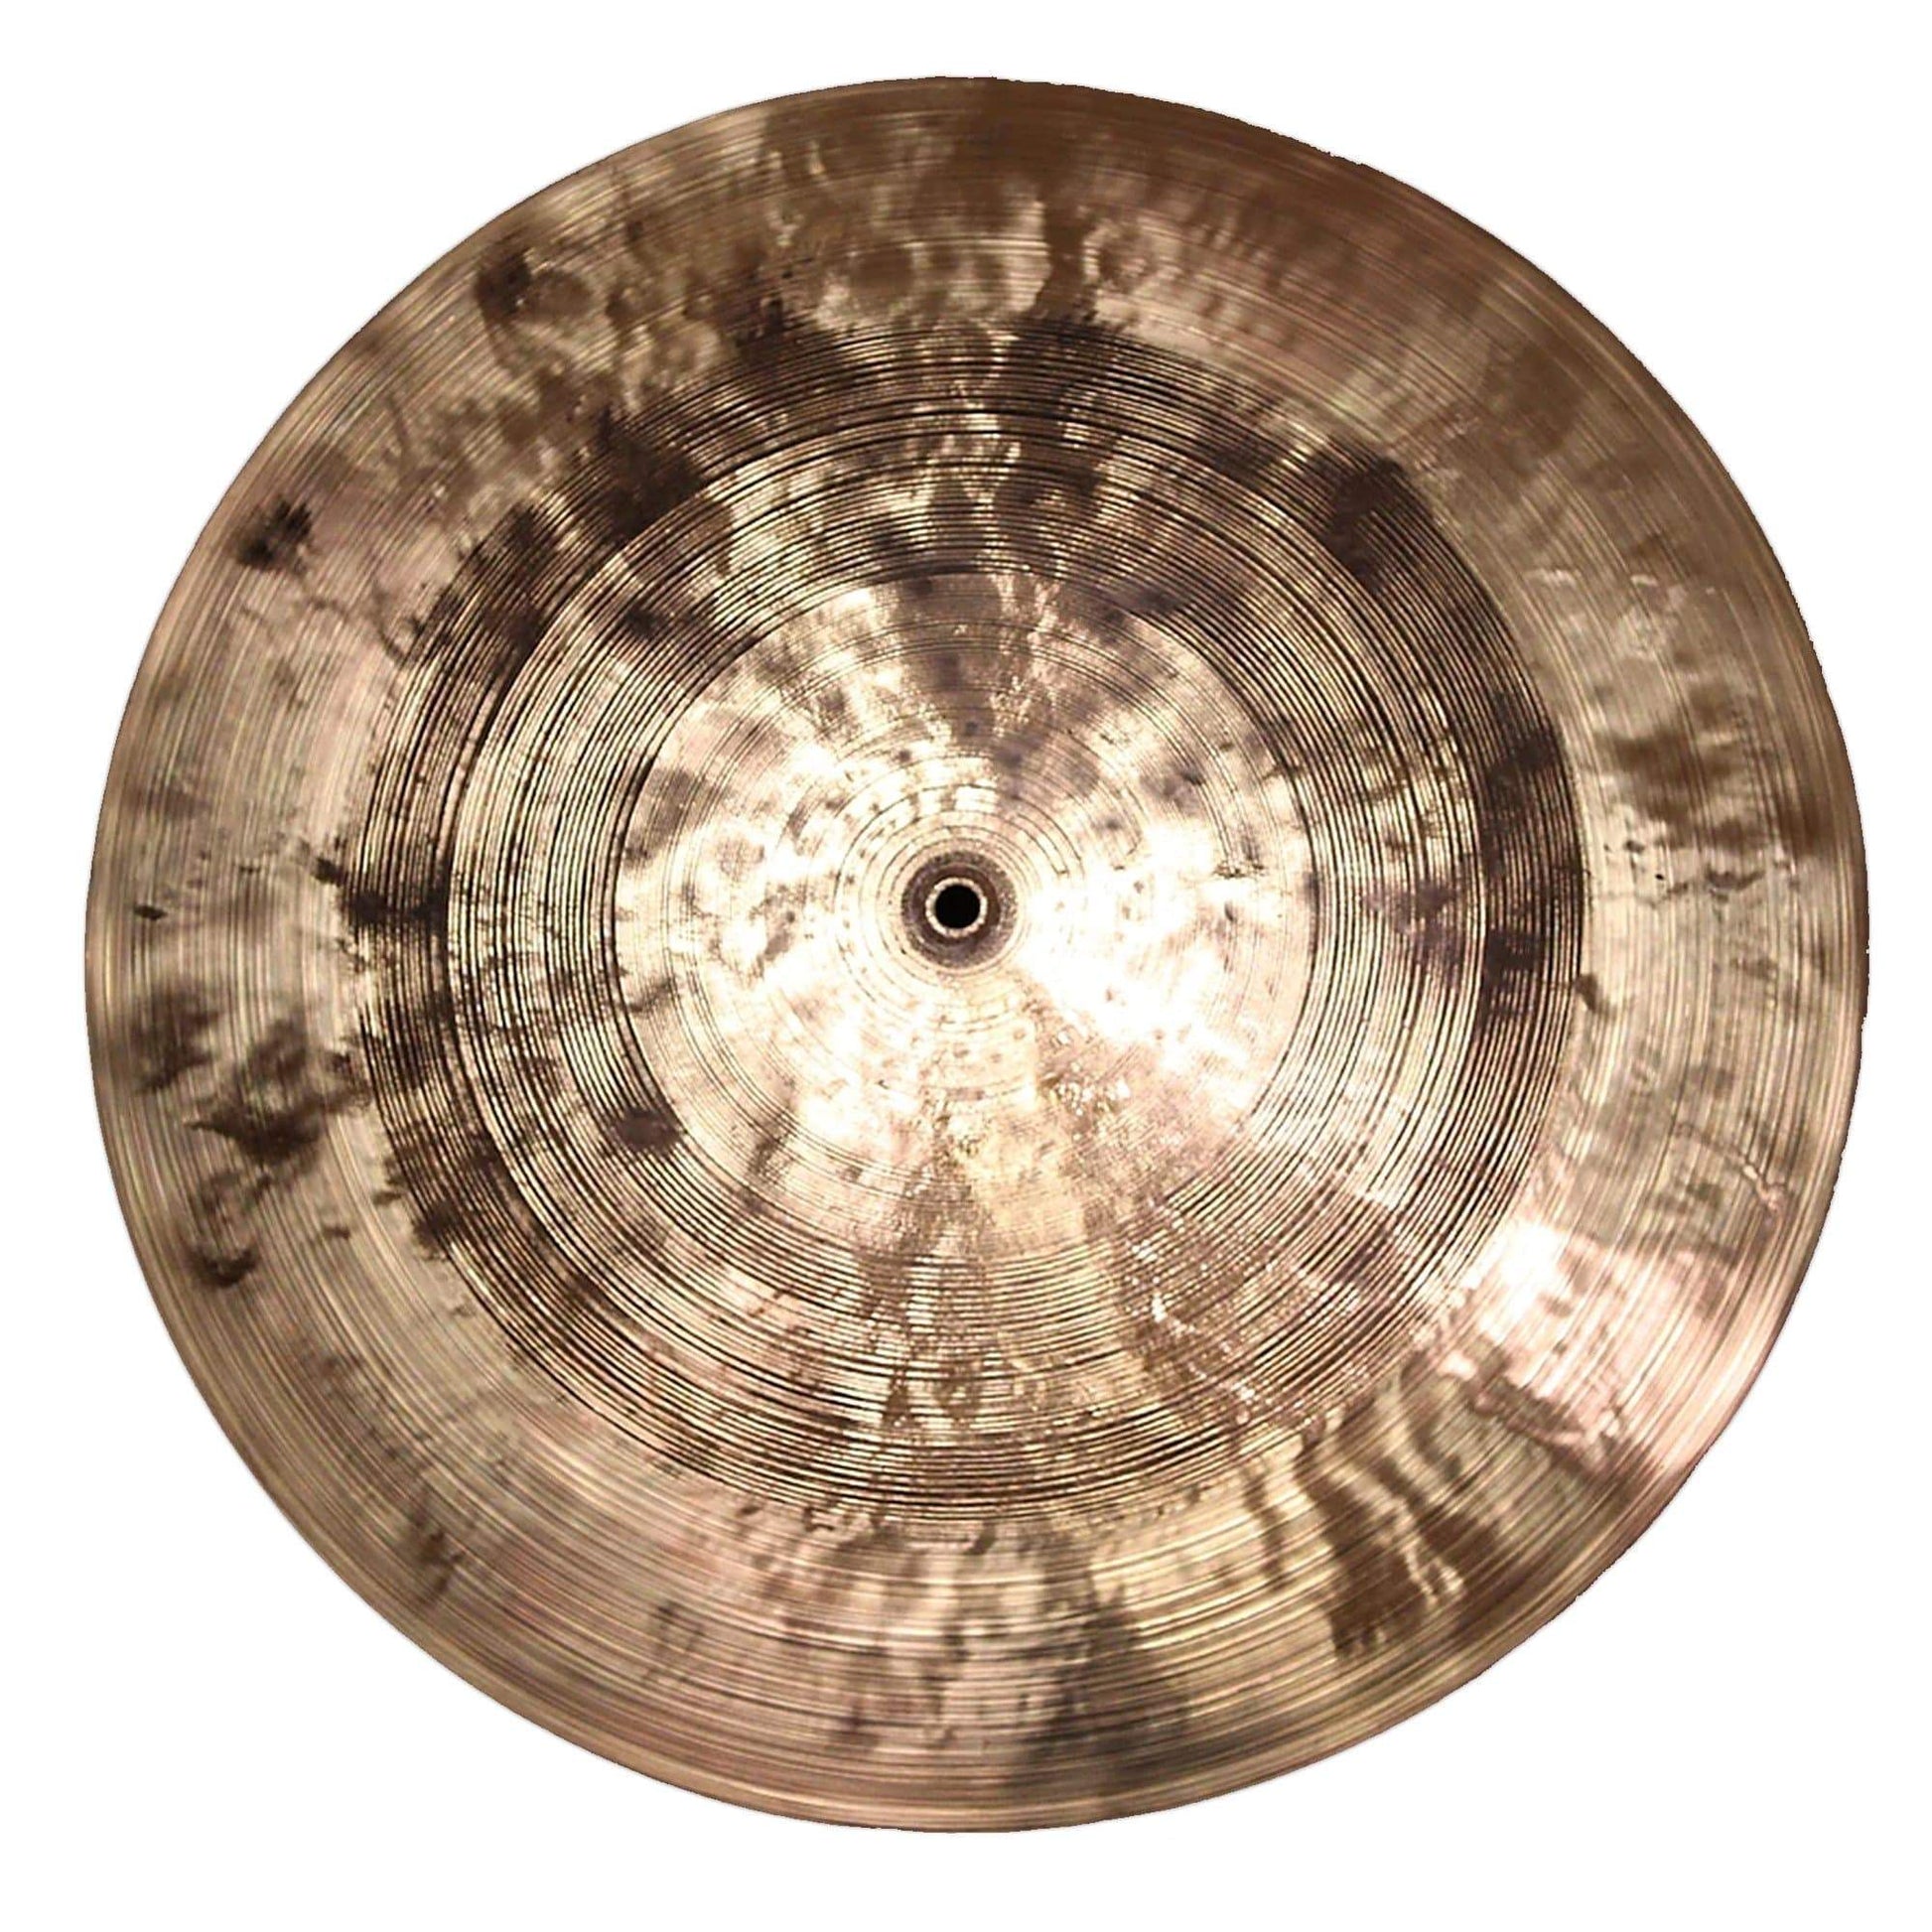 Byrne Quarter Turk Series 20" Flat Ride Cymbal 2146 Grams Banded & Partially Lathed Drums and Percussion / Cymbals / Ride